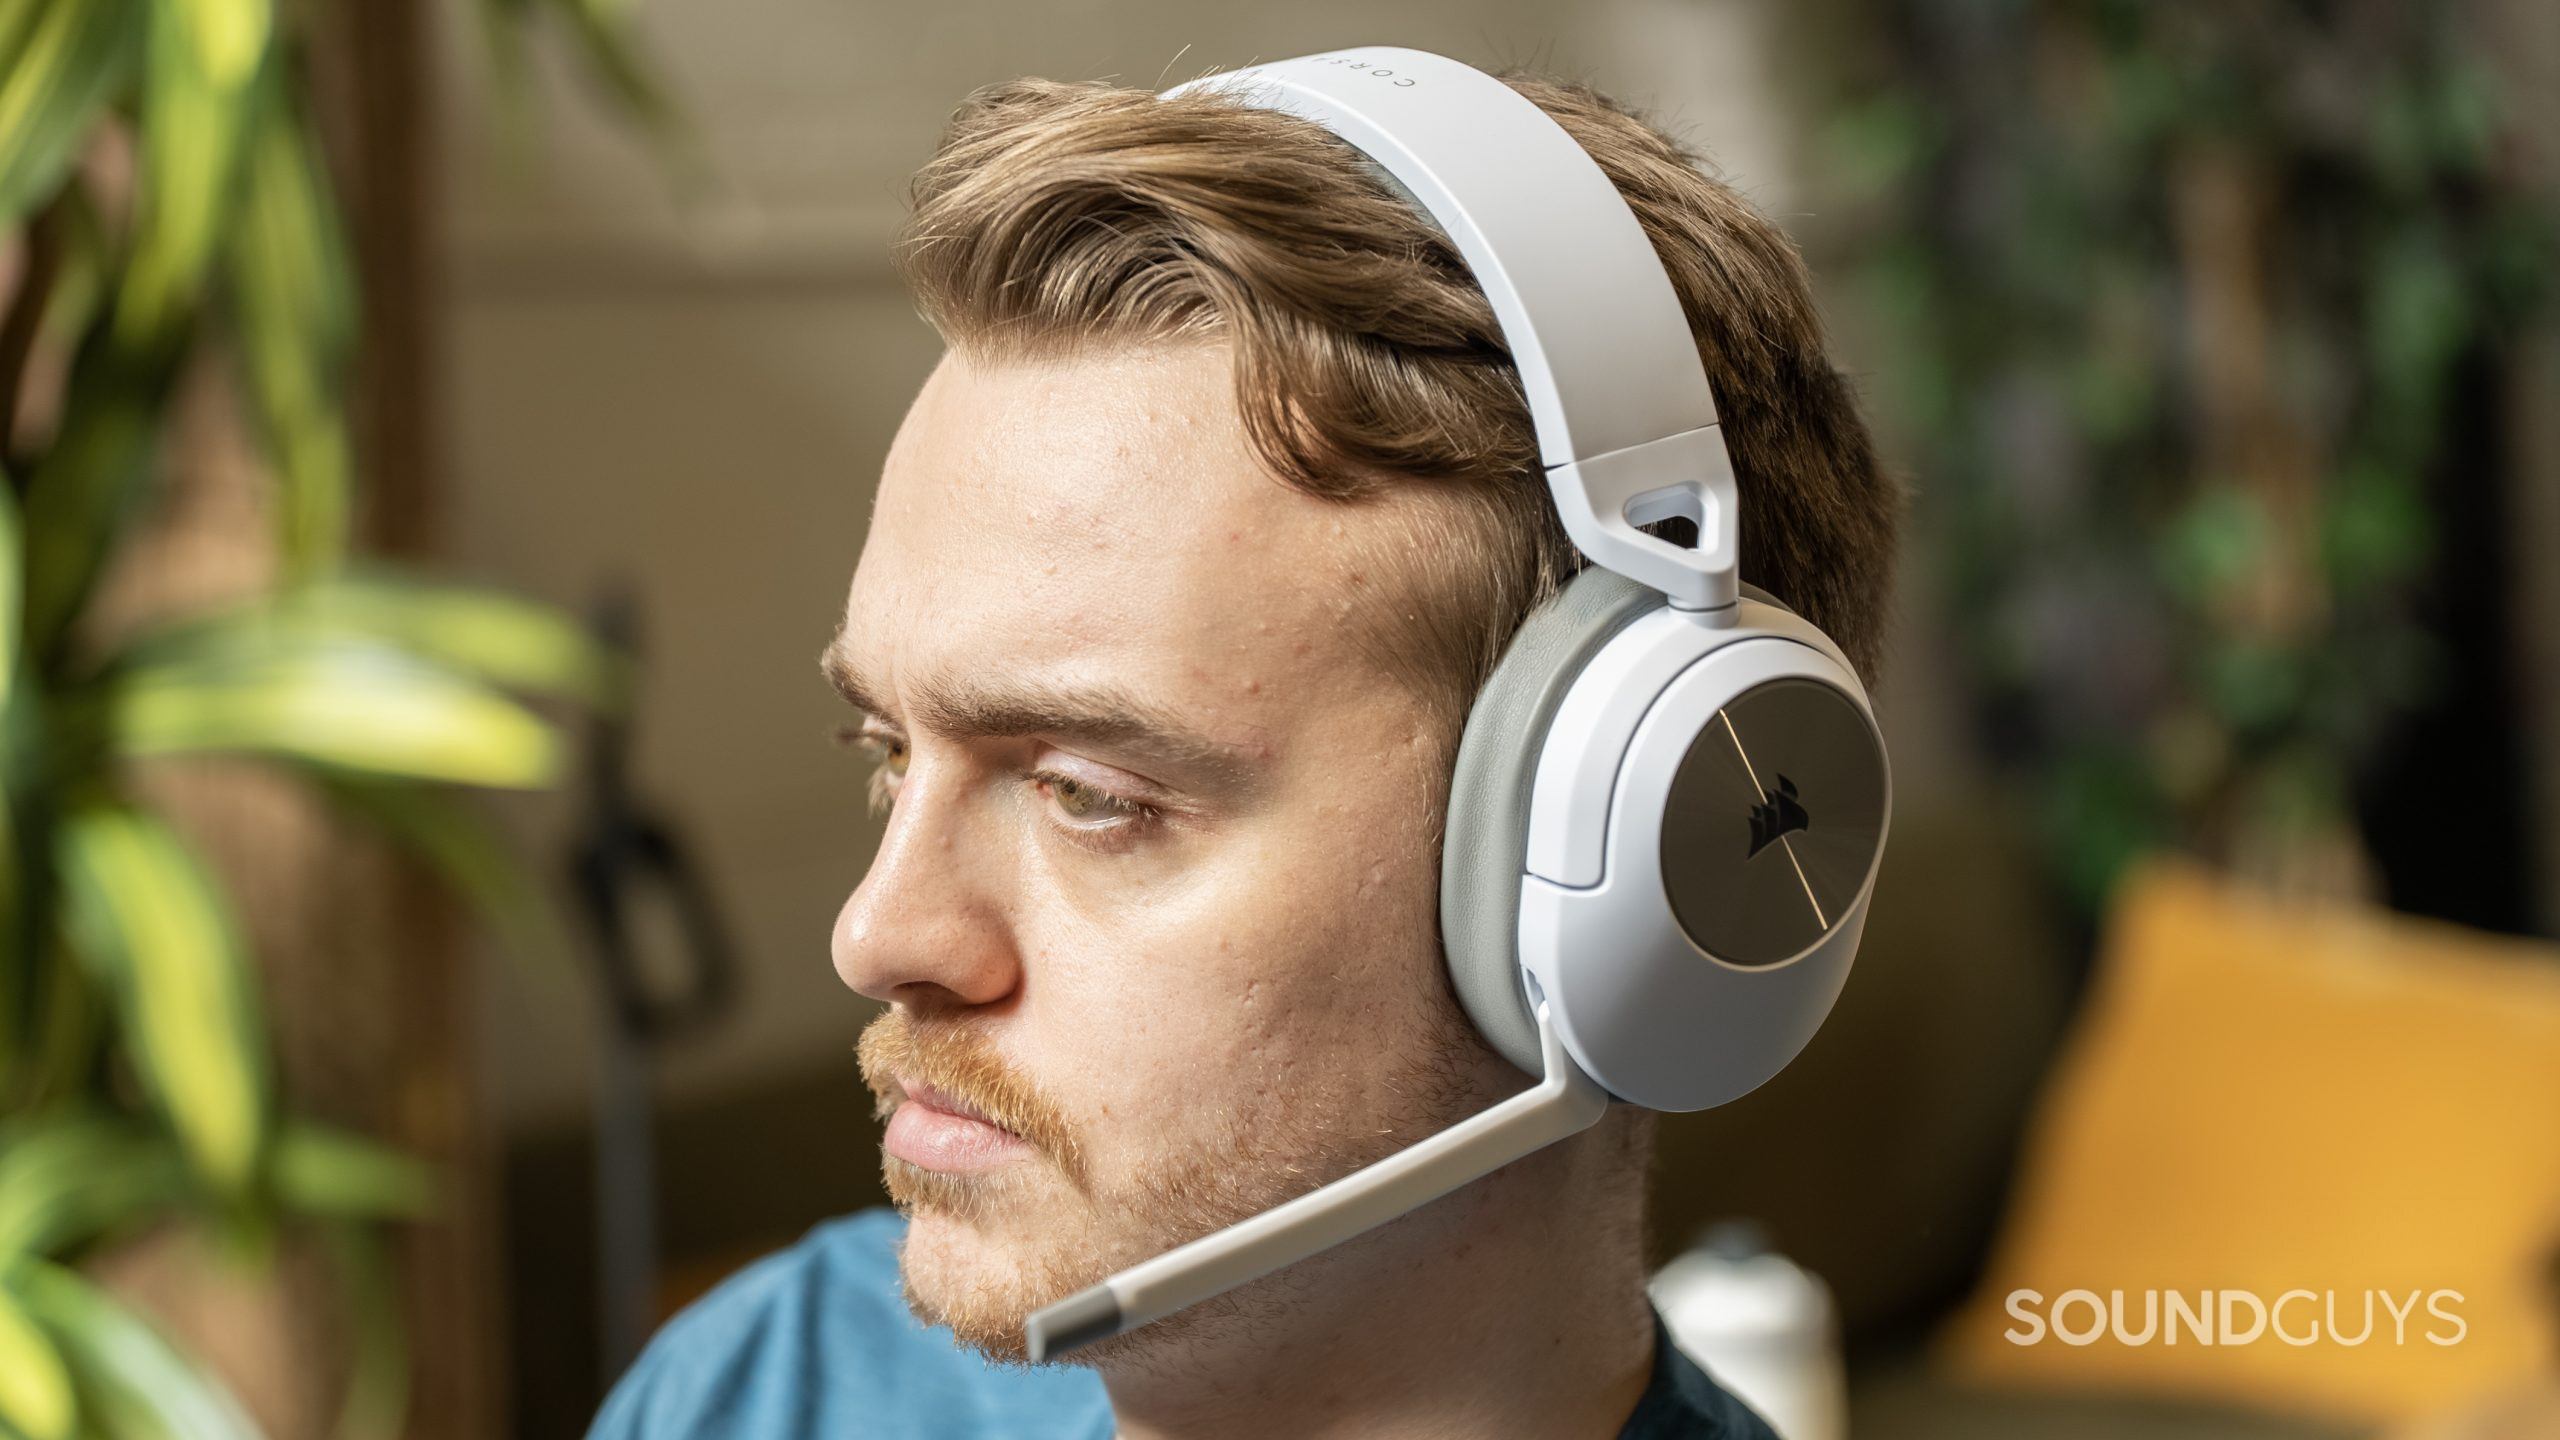 How to connect your gaming headset to any platform - SoundGuys